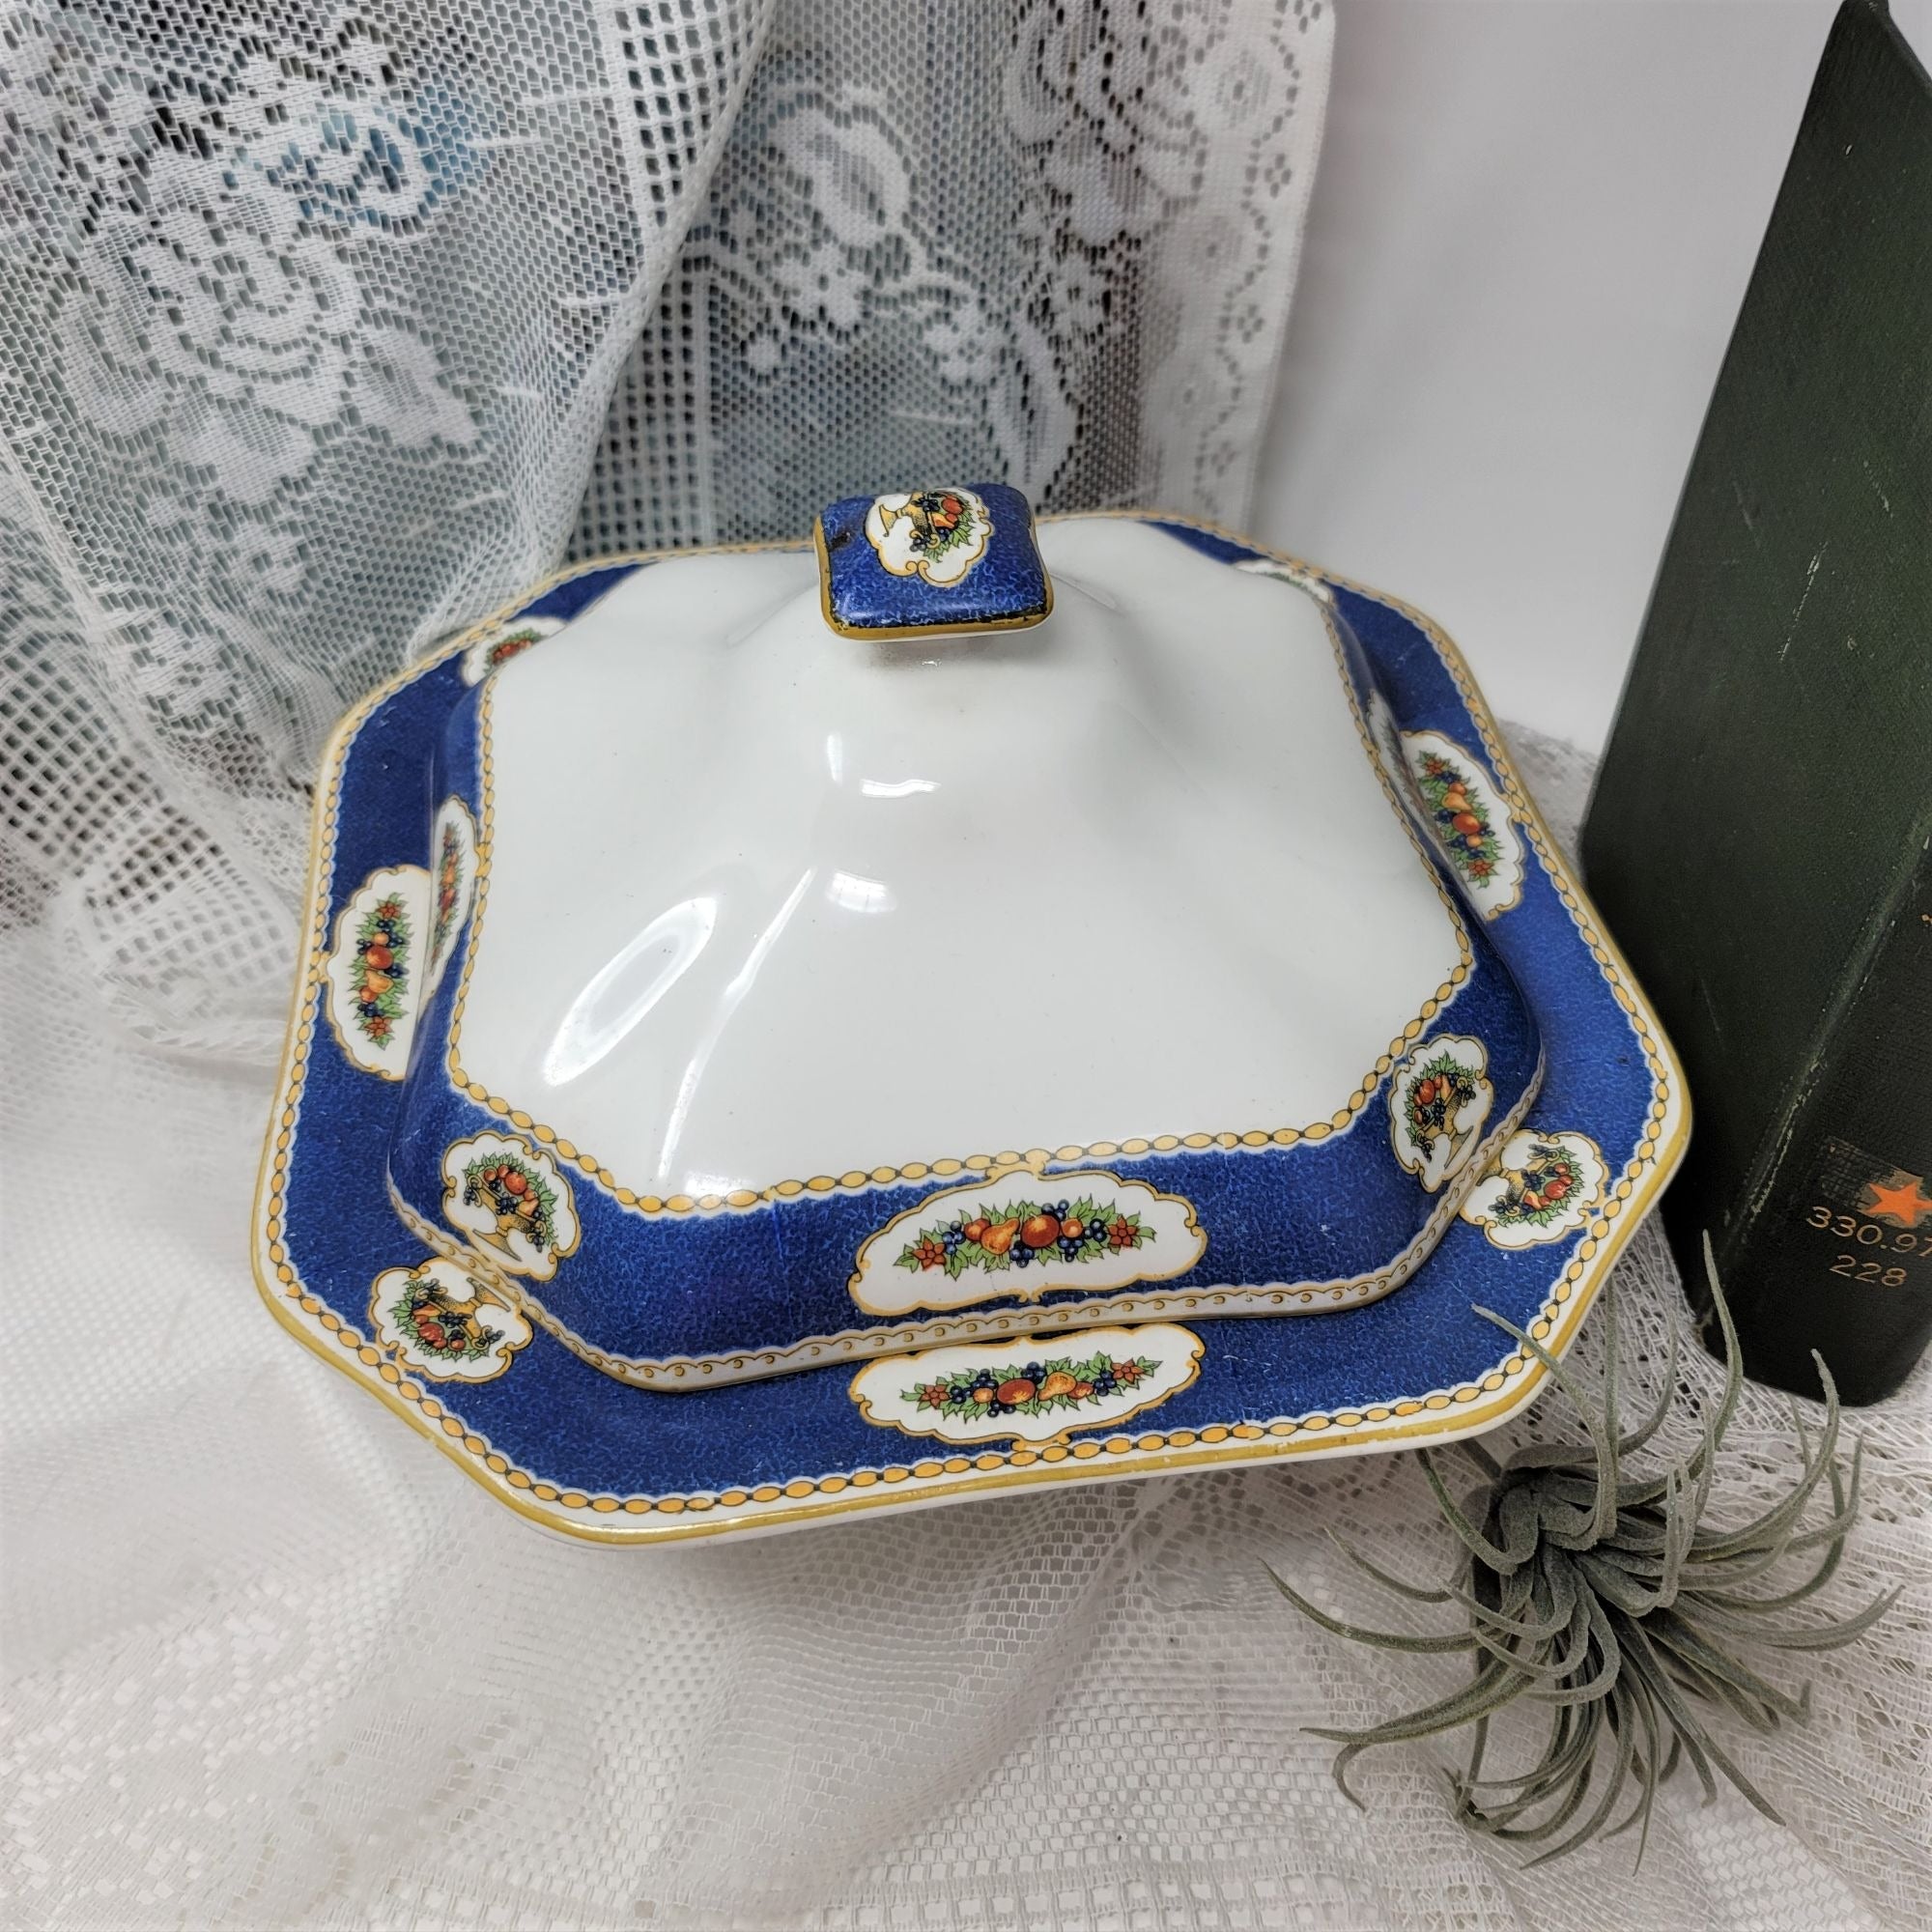 Wyott Son & Co Harvest #1613 Covered Dish